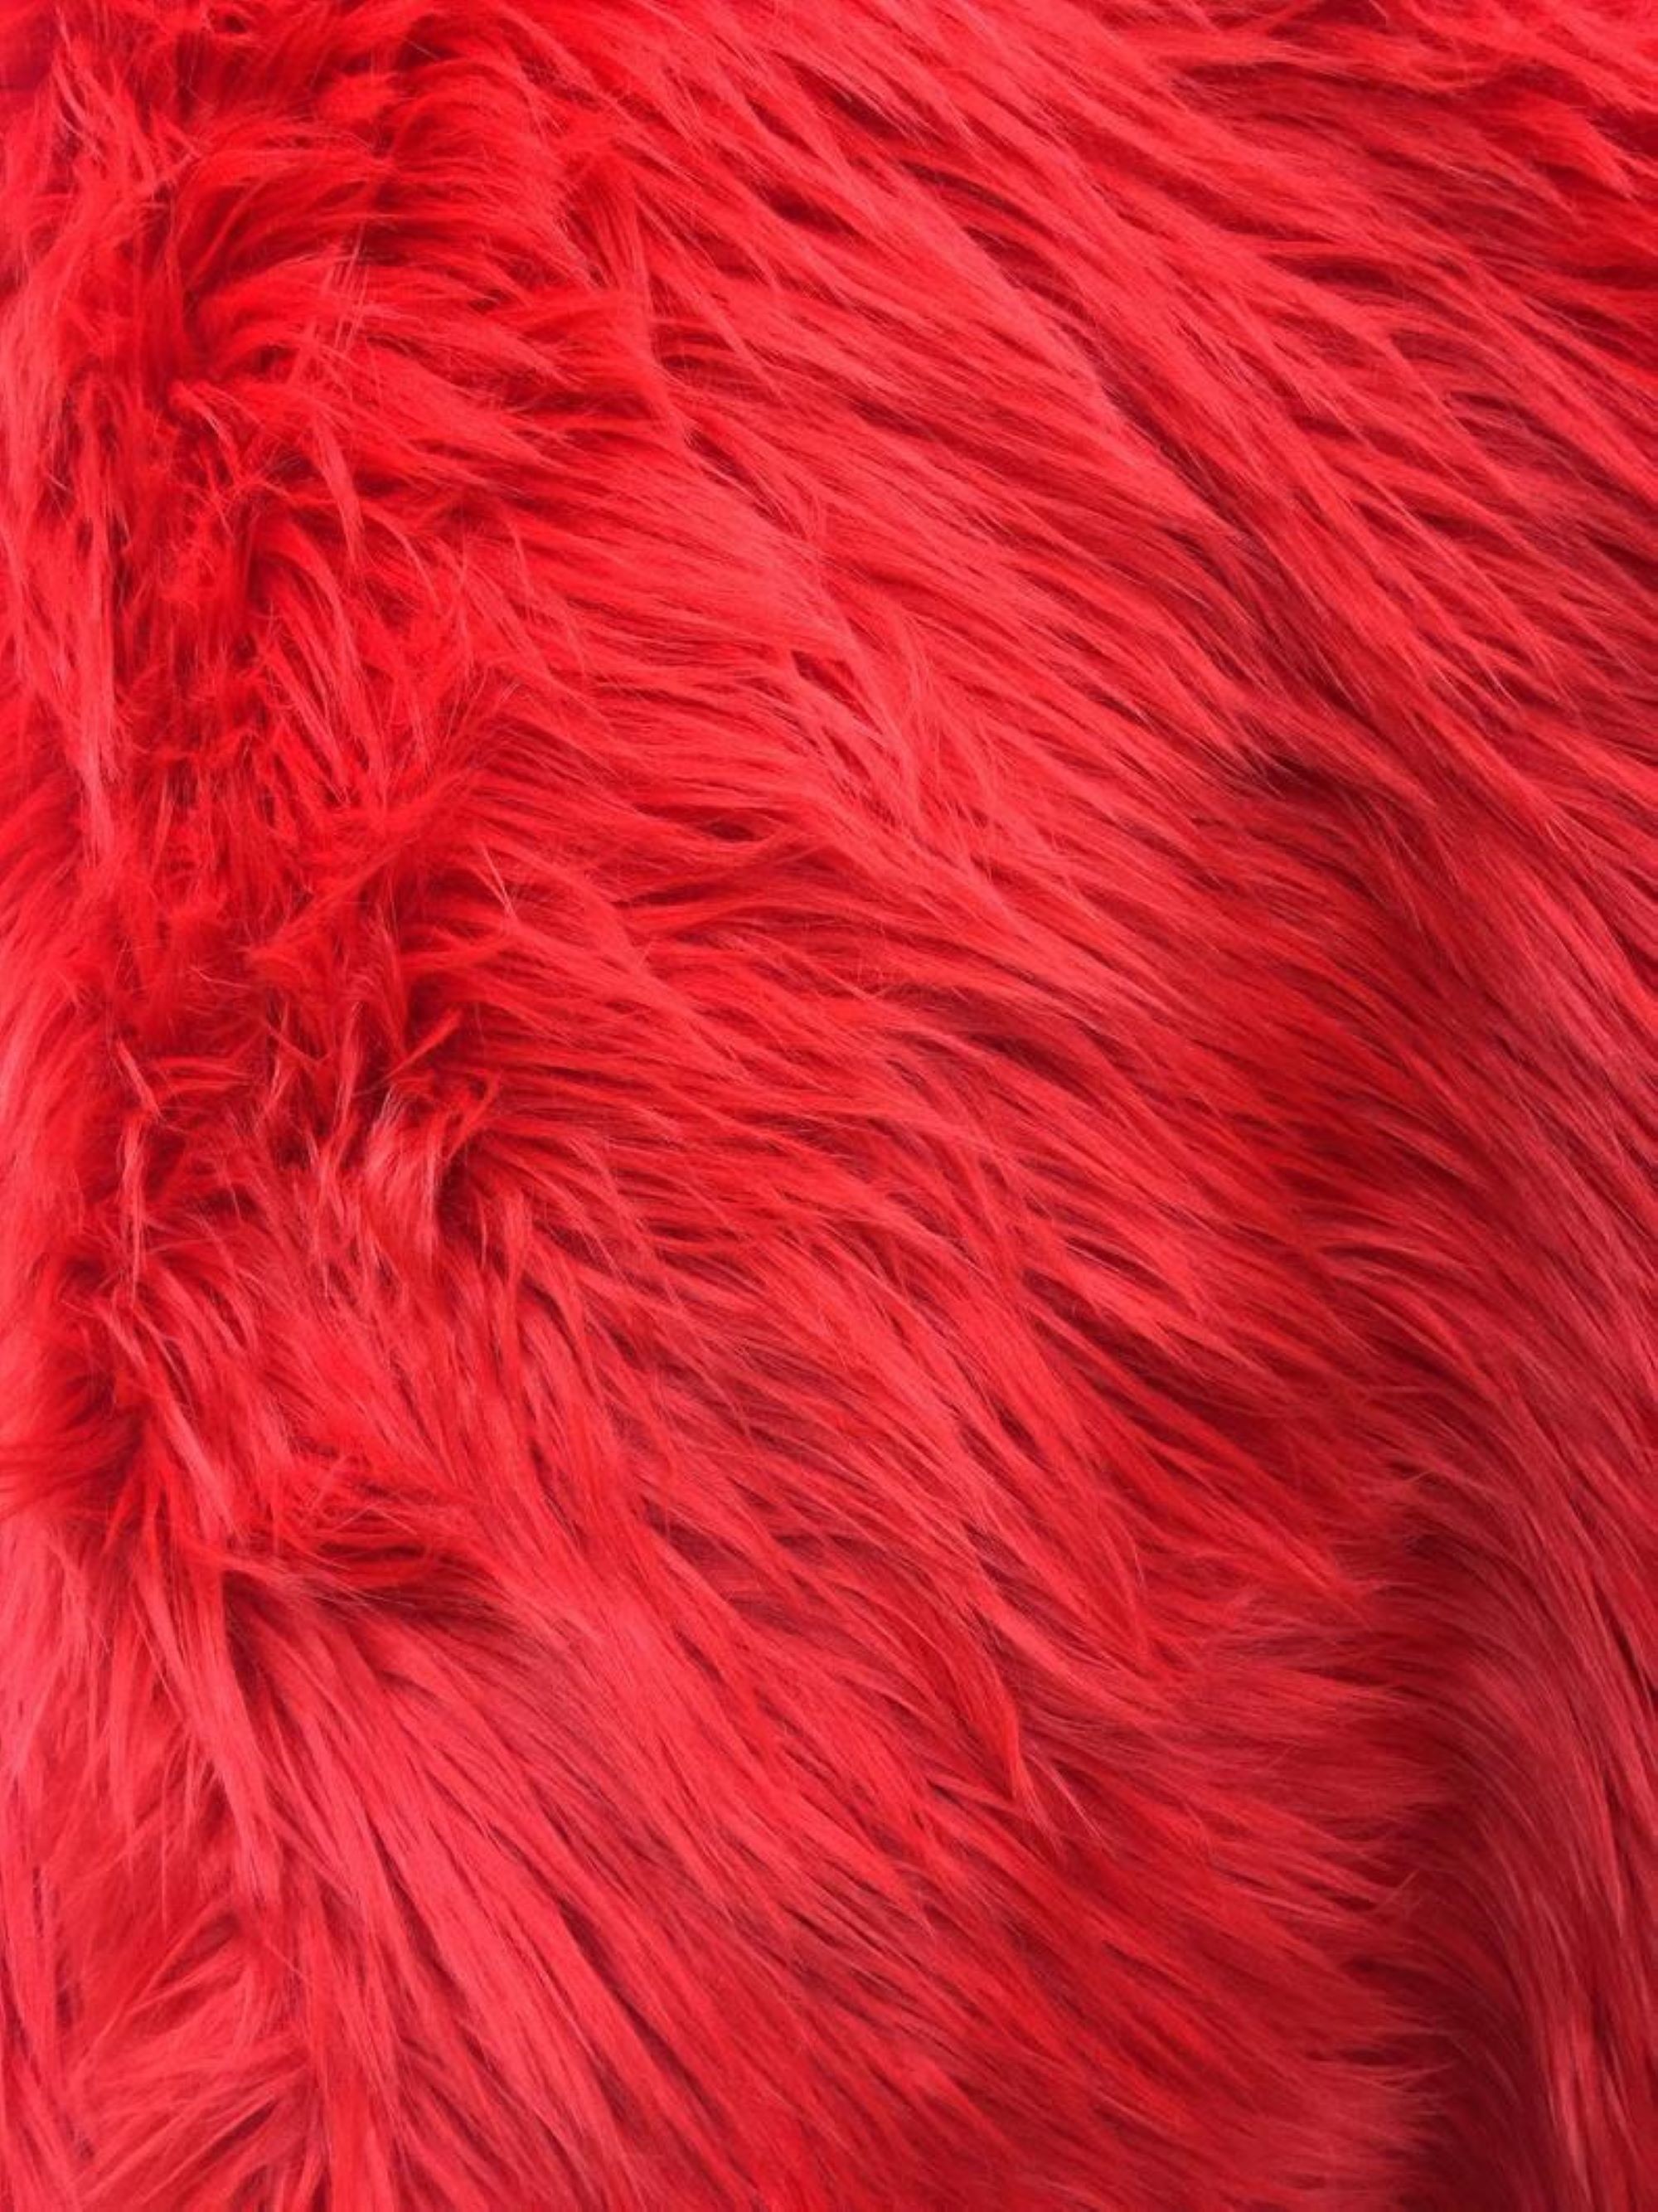 Fluffy soft long pile faux fur neon yellow red camo cow material sale fabric 